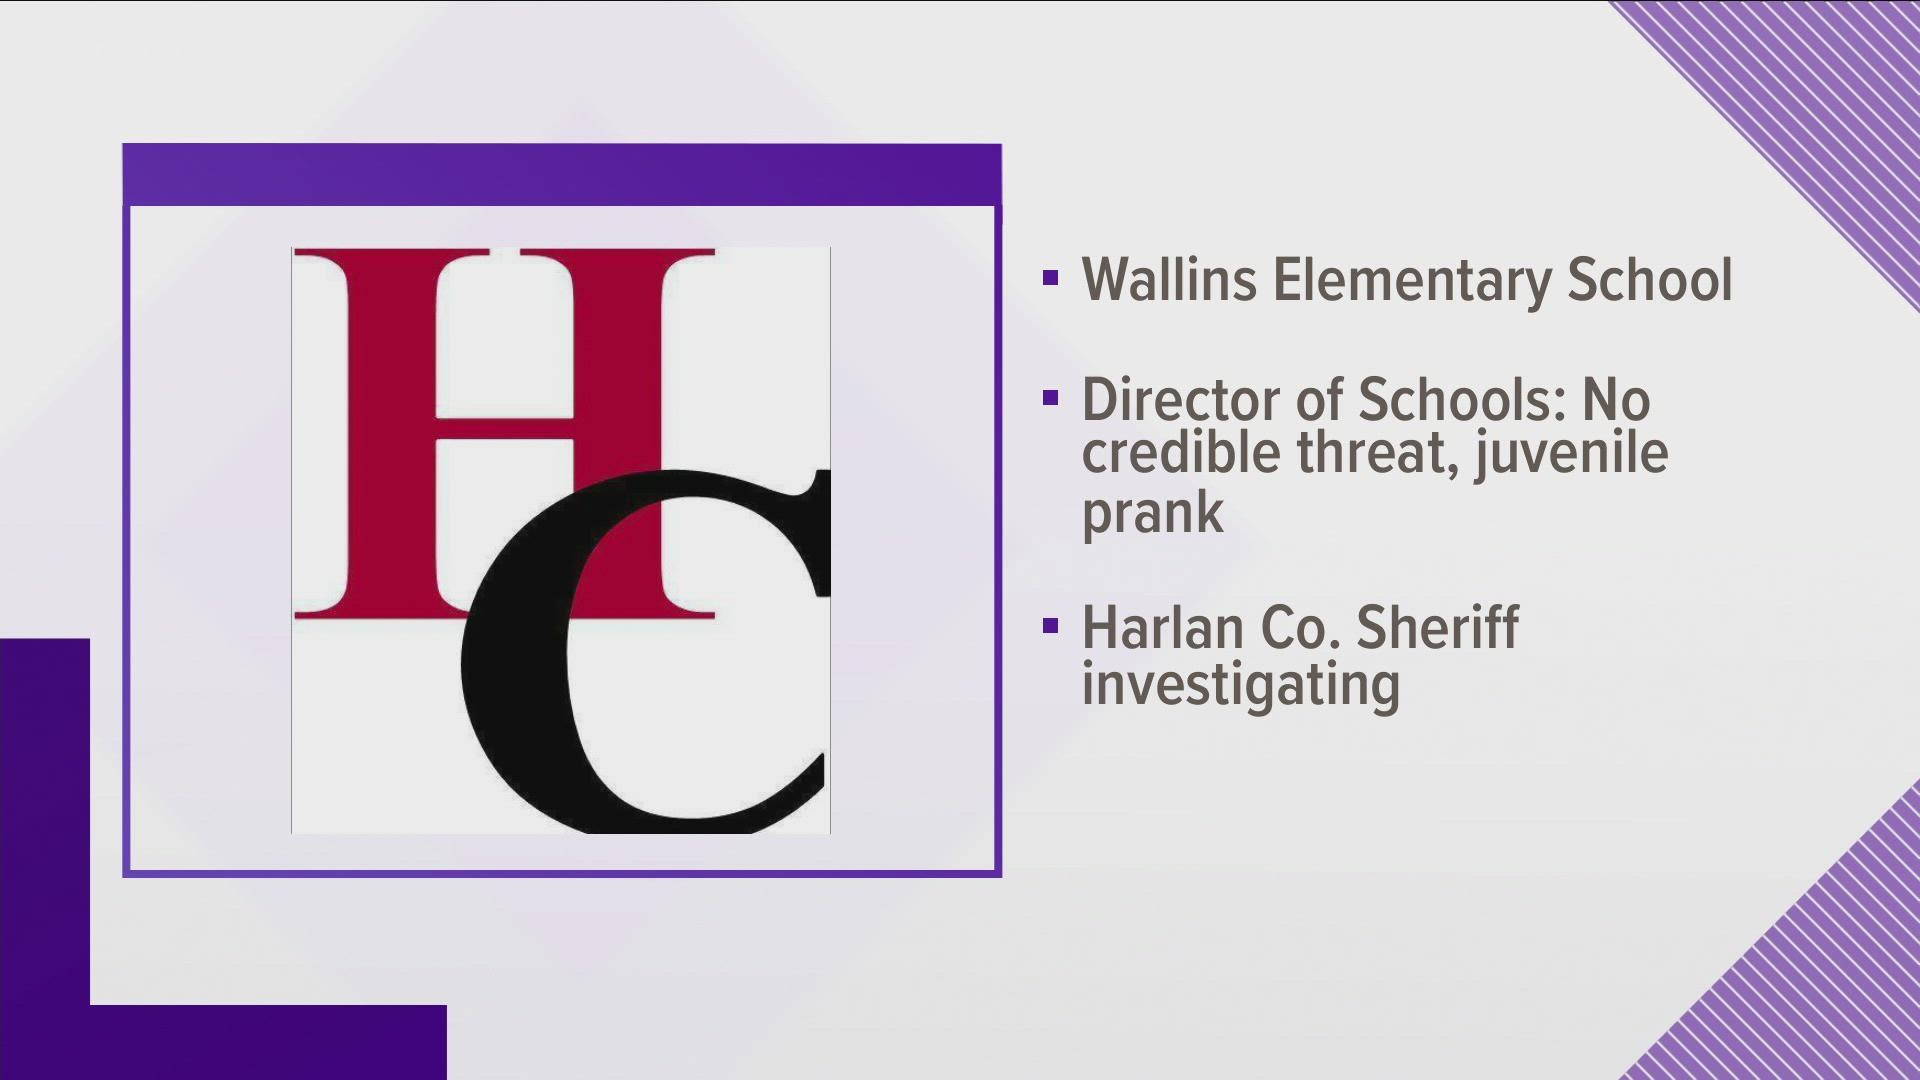 The school system said two juveniles are charged after calling in a bomb threat at Wallins Elementary.
Authorities said the juveniles do not attend that school.